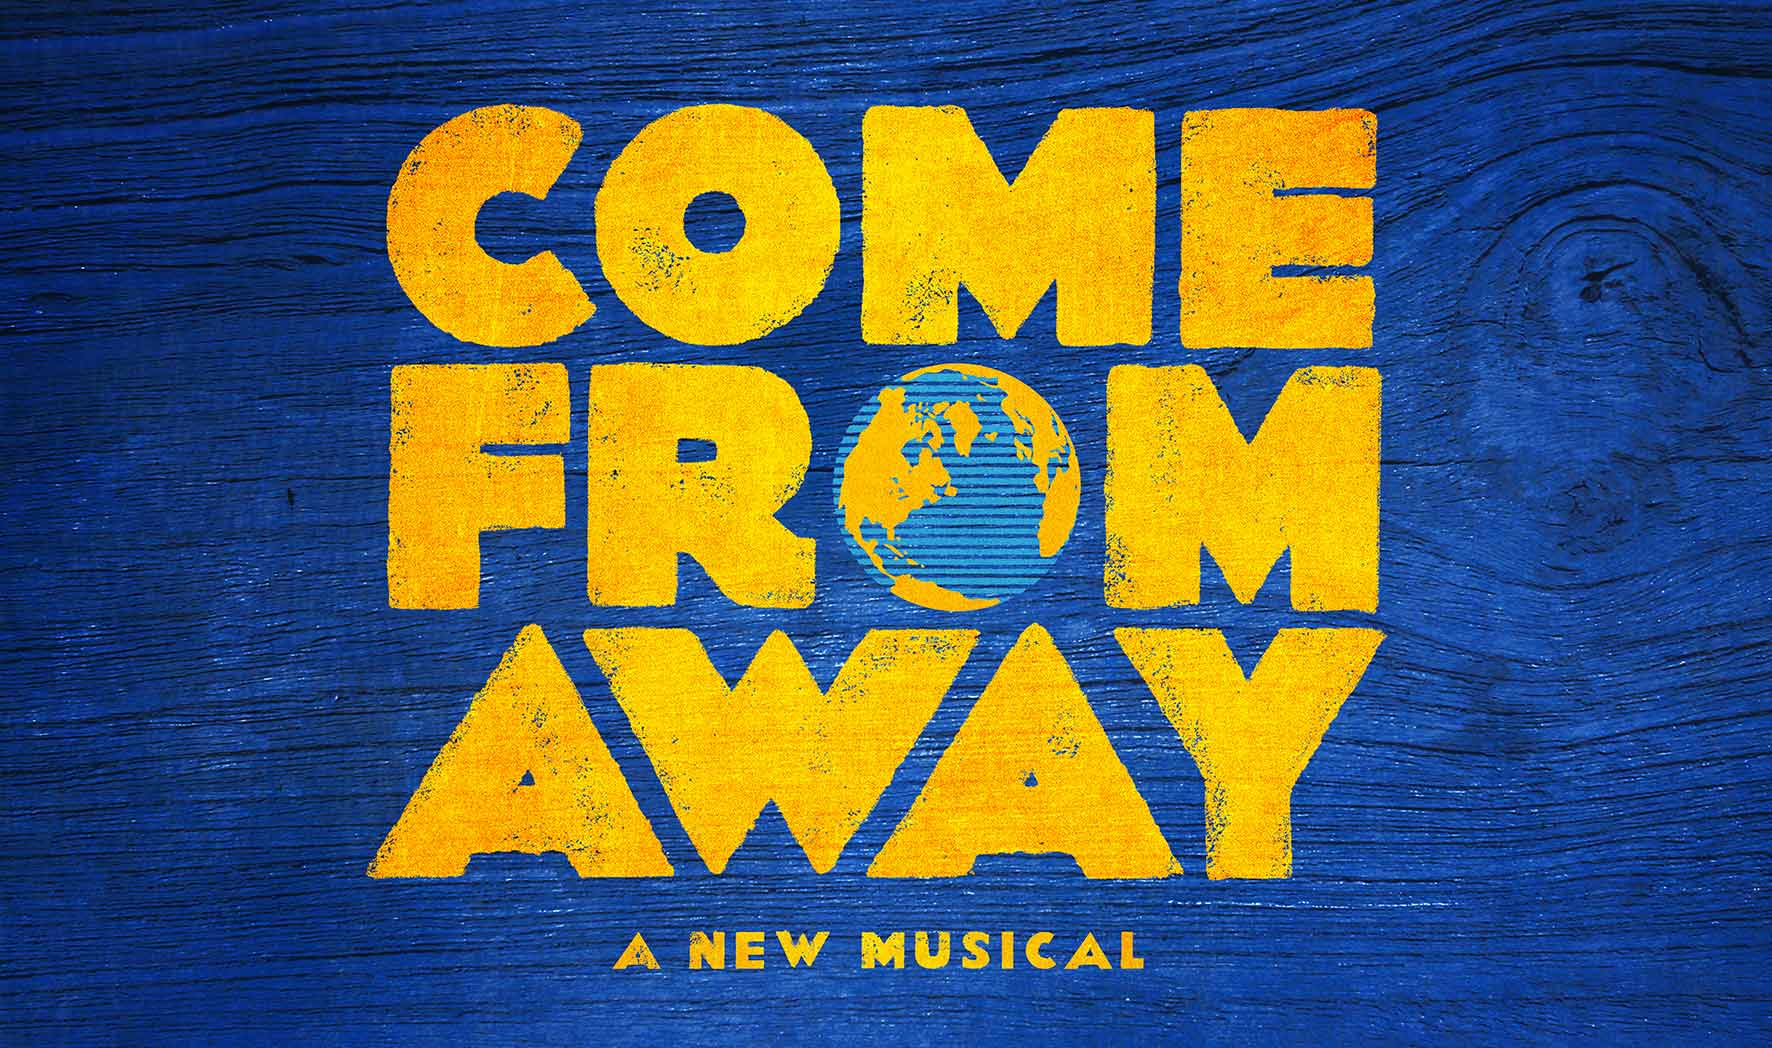 More Info for Come From Away